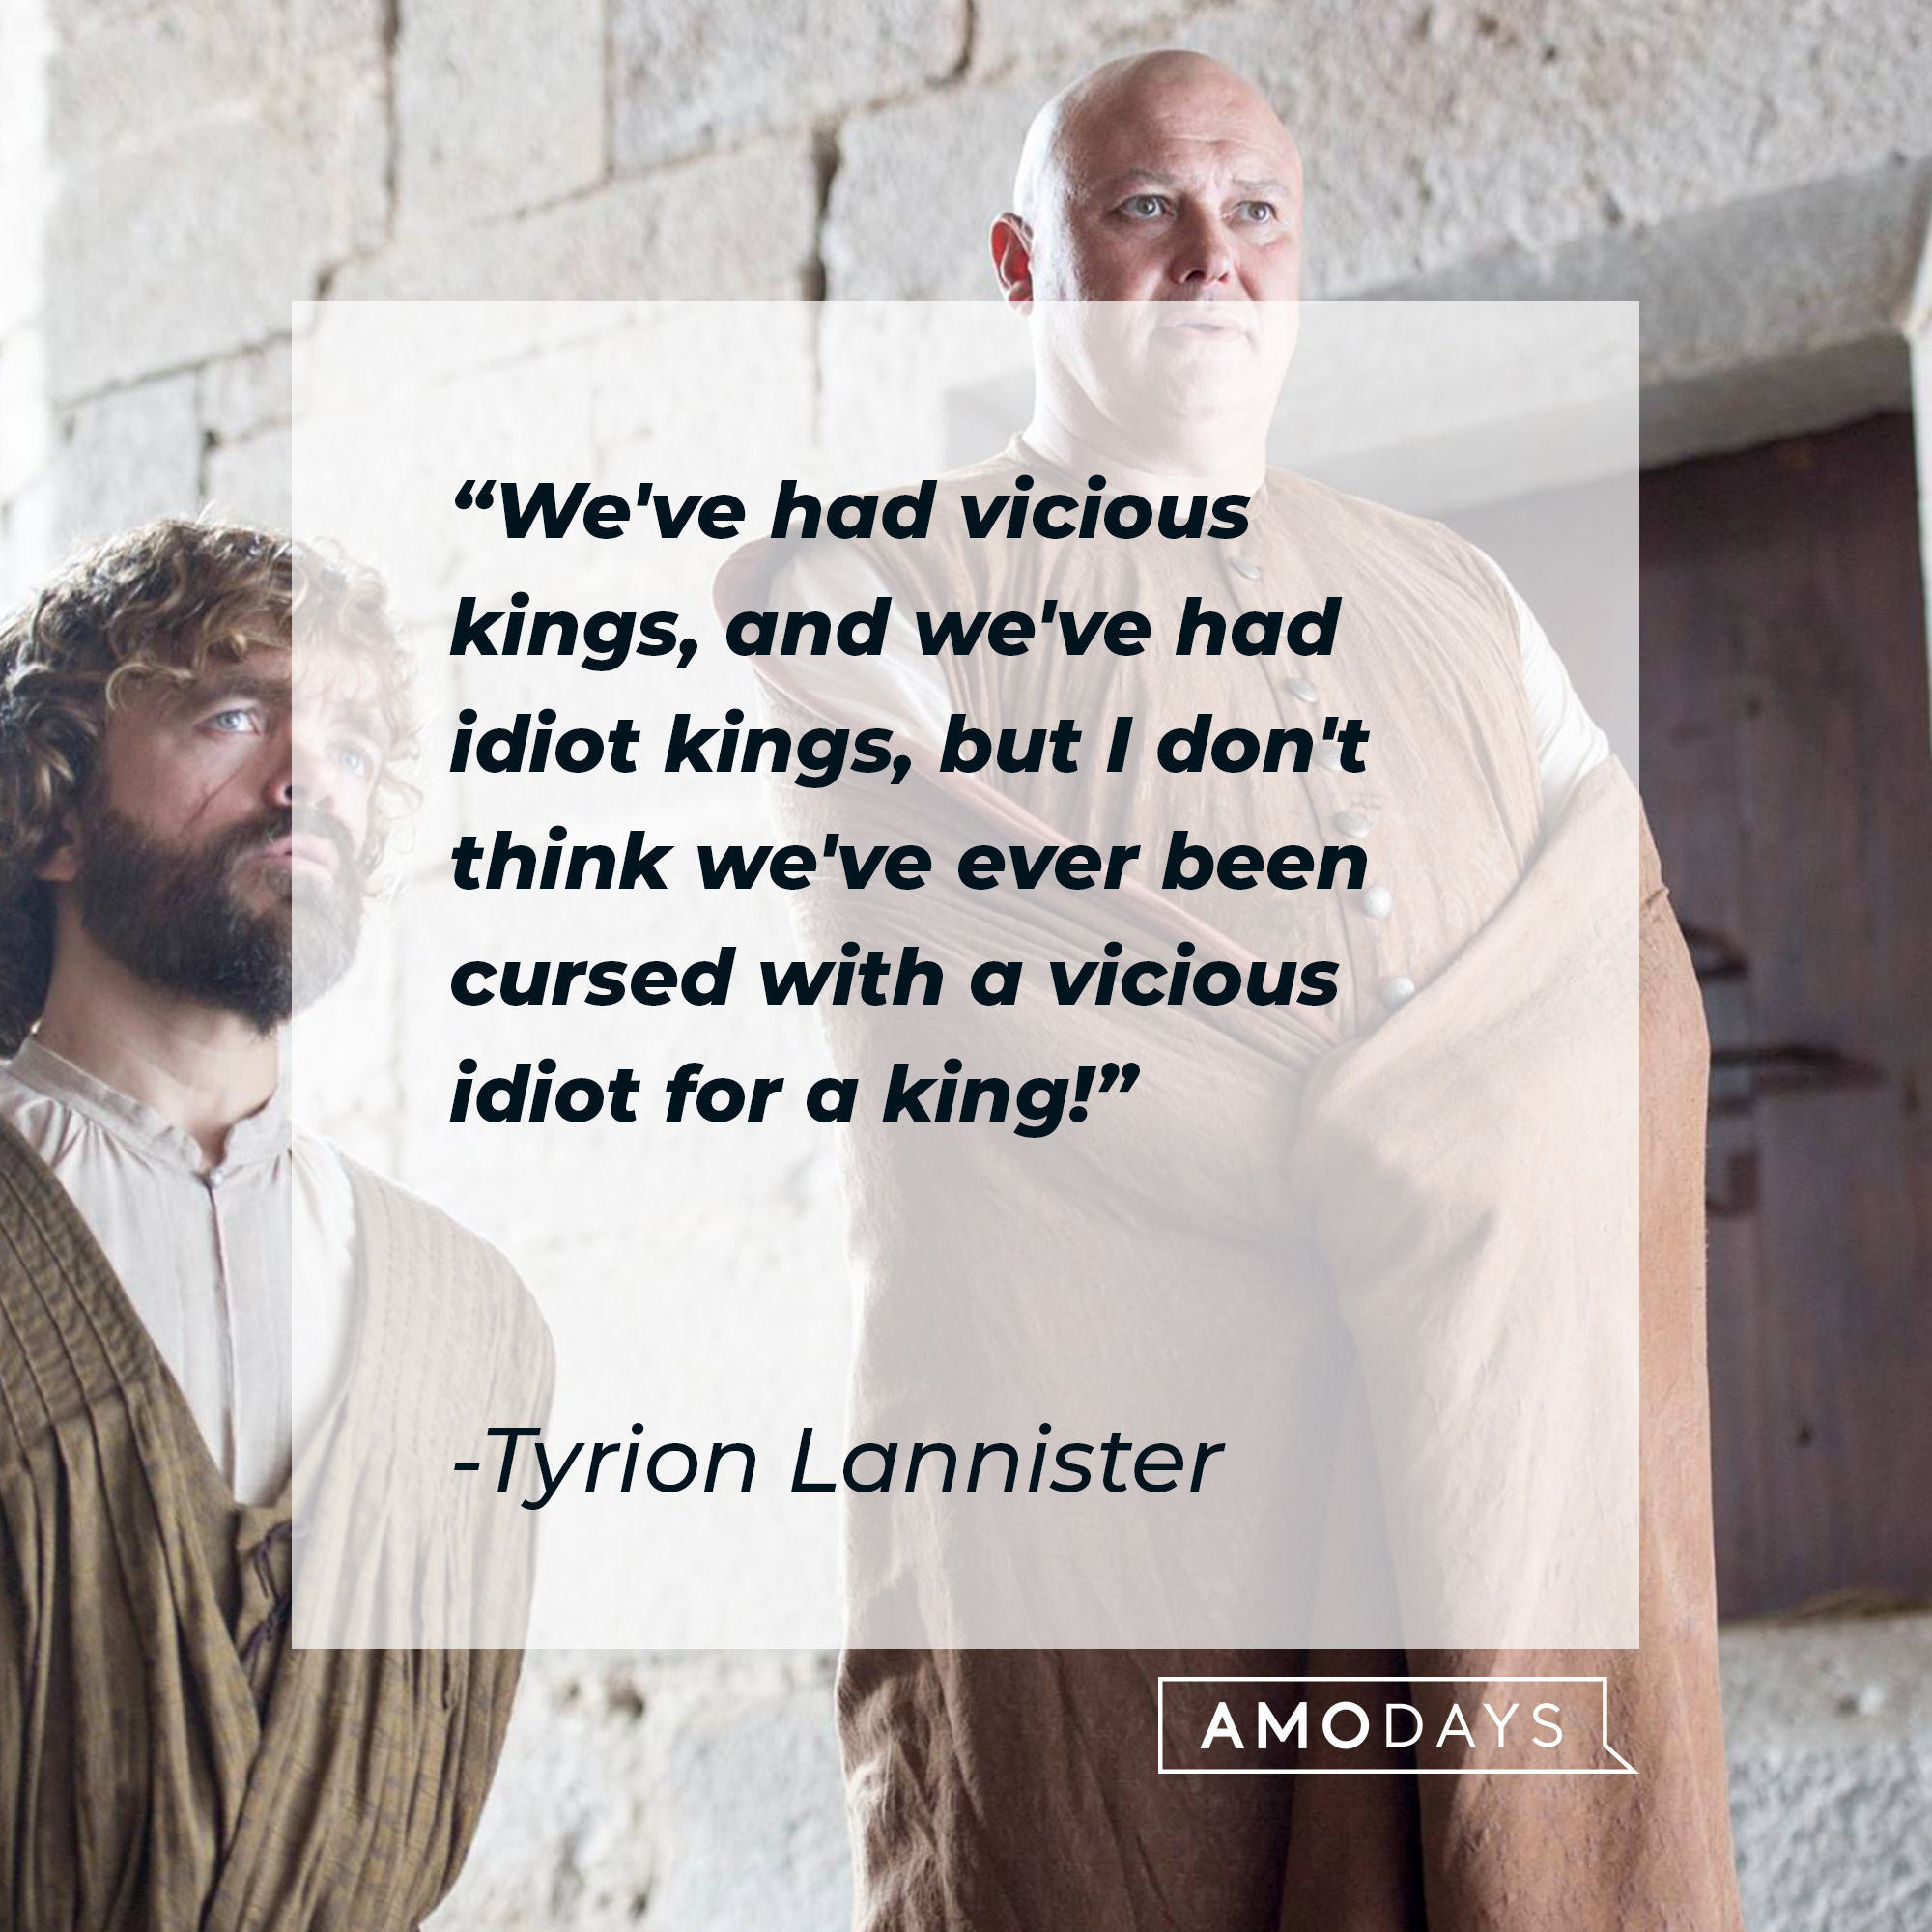 Tyrion Lannister's quote: “We've had vicious kings, and we've had idiot kings, but I don't think we've ever been cursed with a vicious idiot for a king!” | Source: facebook.com/GameOfThrones